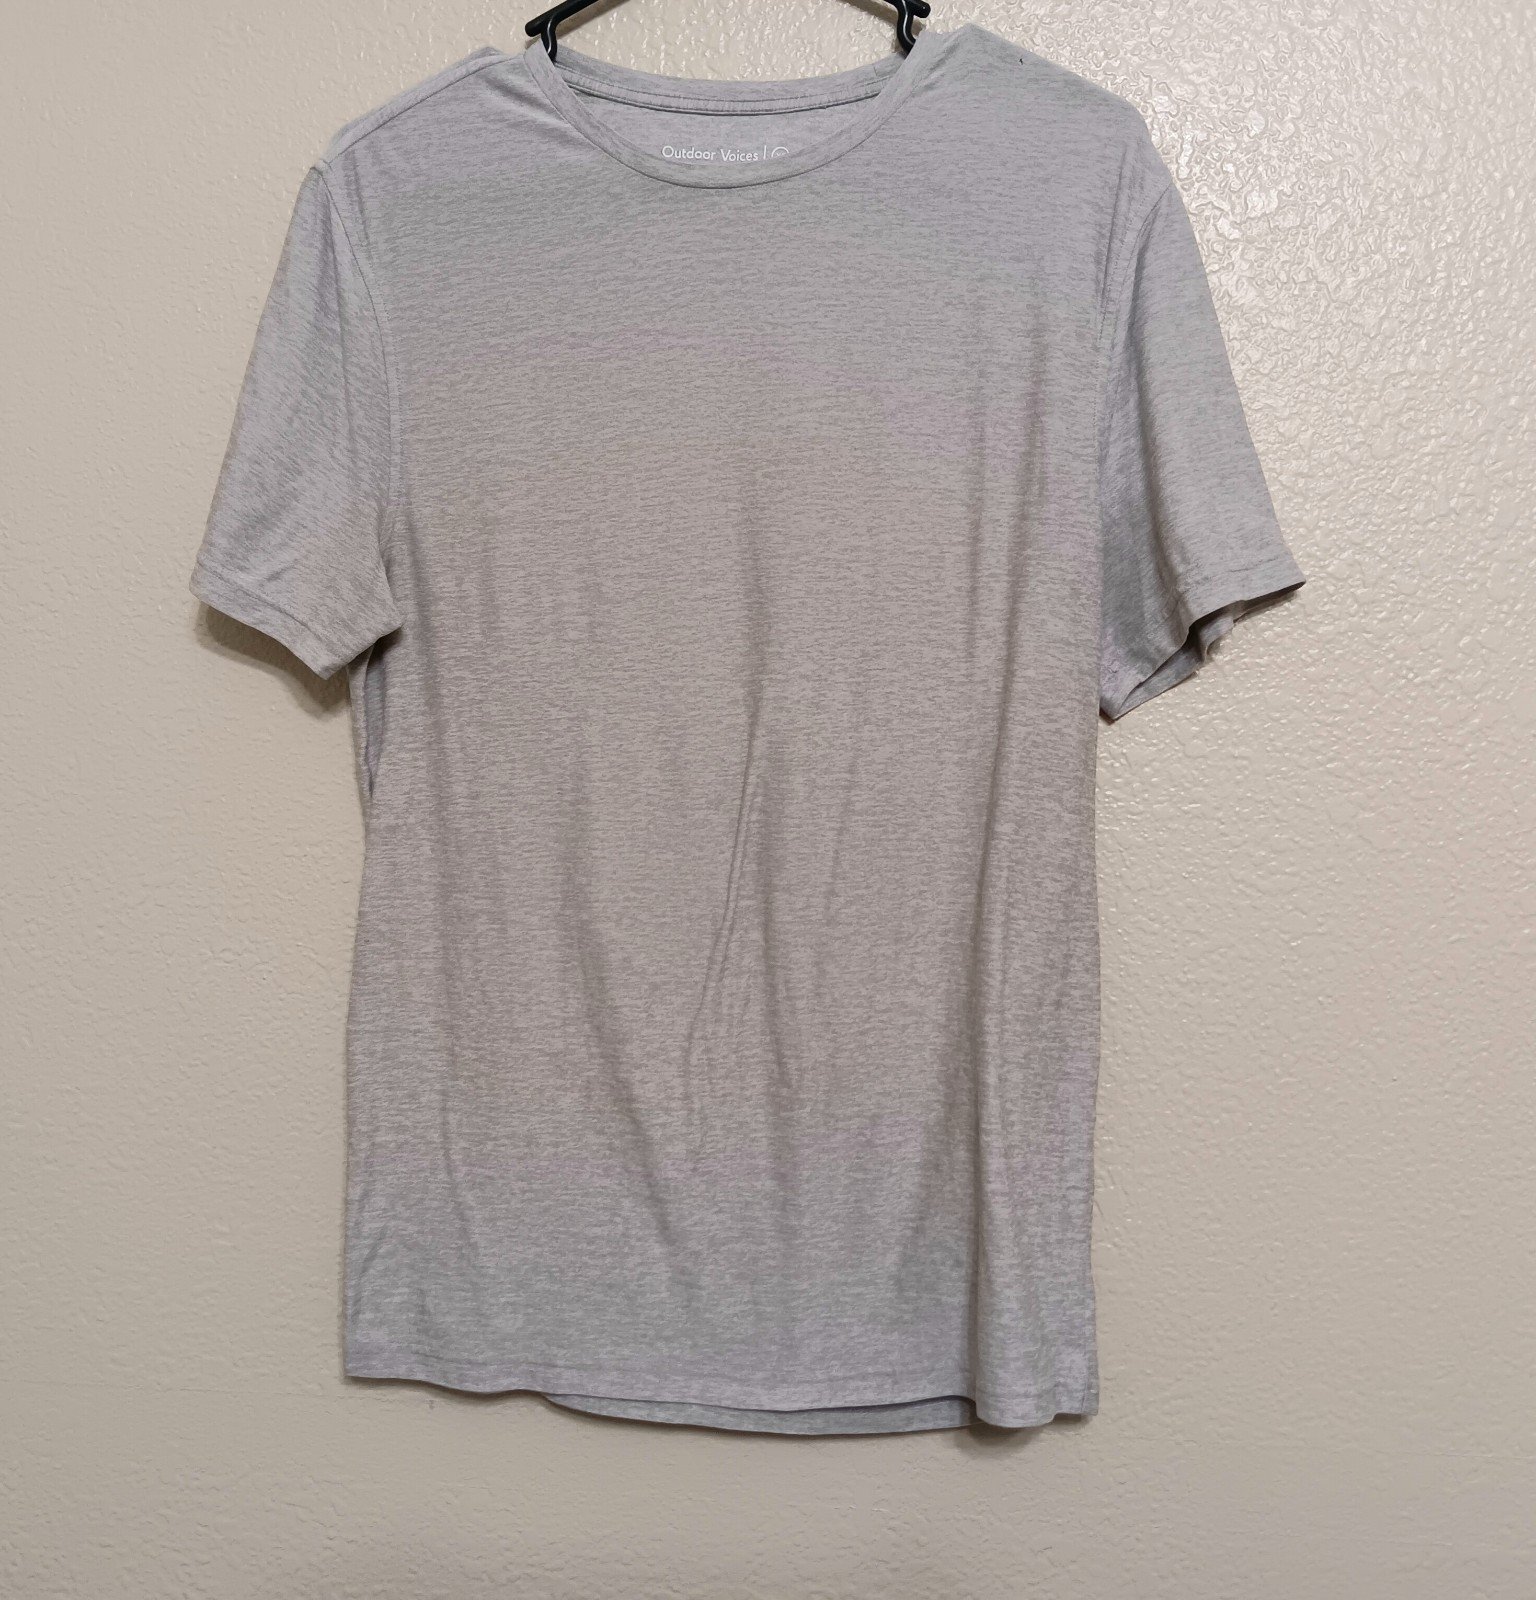 large selection Outdoor Voices Heather Gray Short Sleeve Tee kVEIp9Ufw Everyday Low Prices